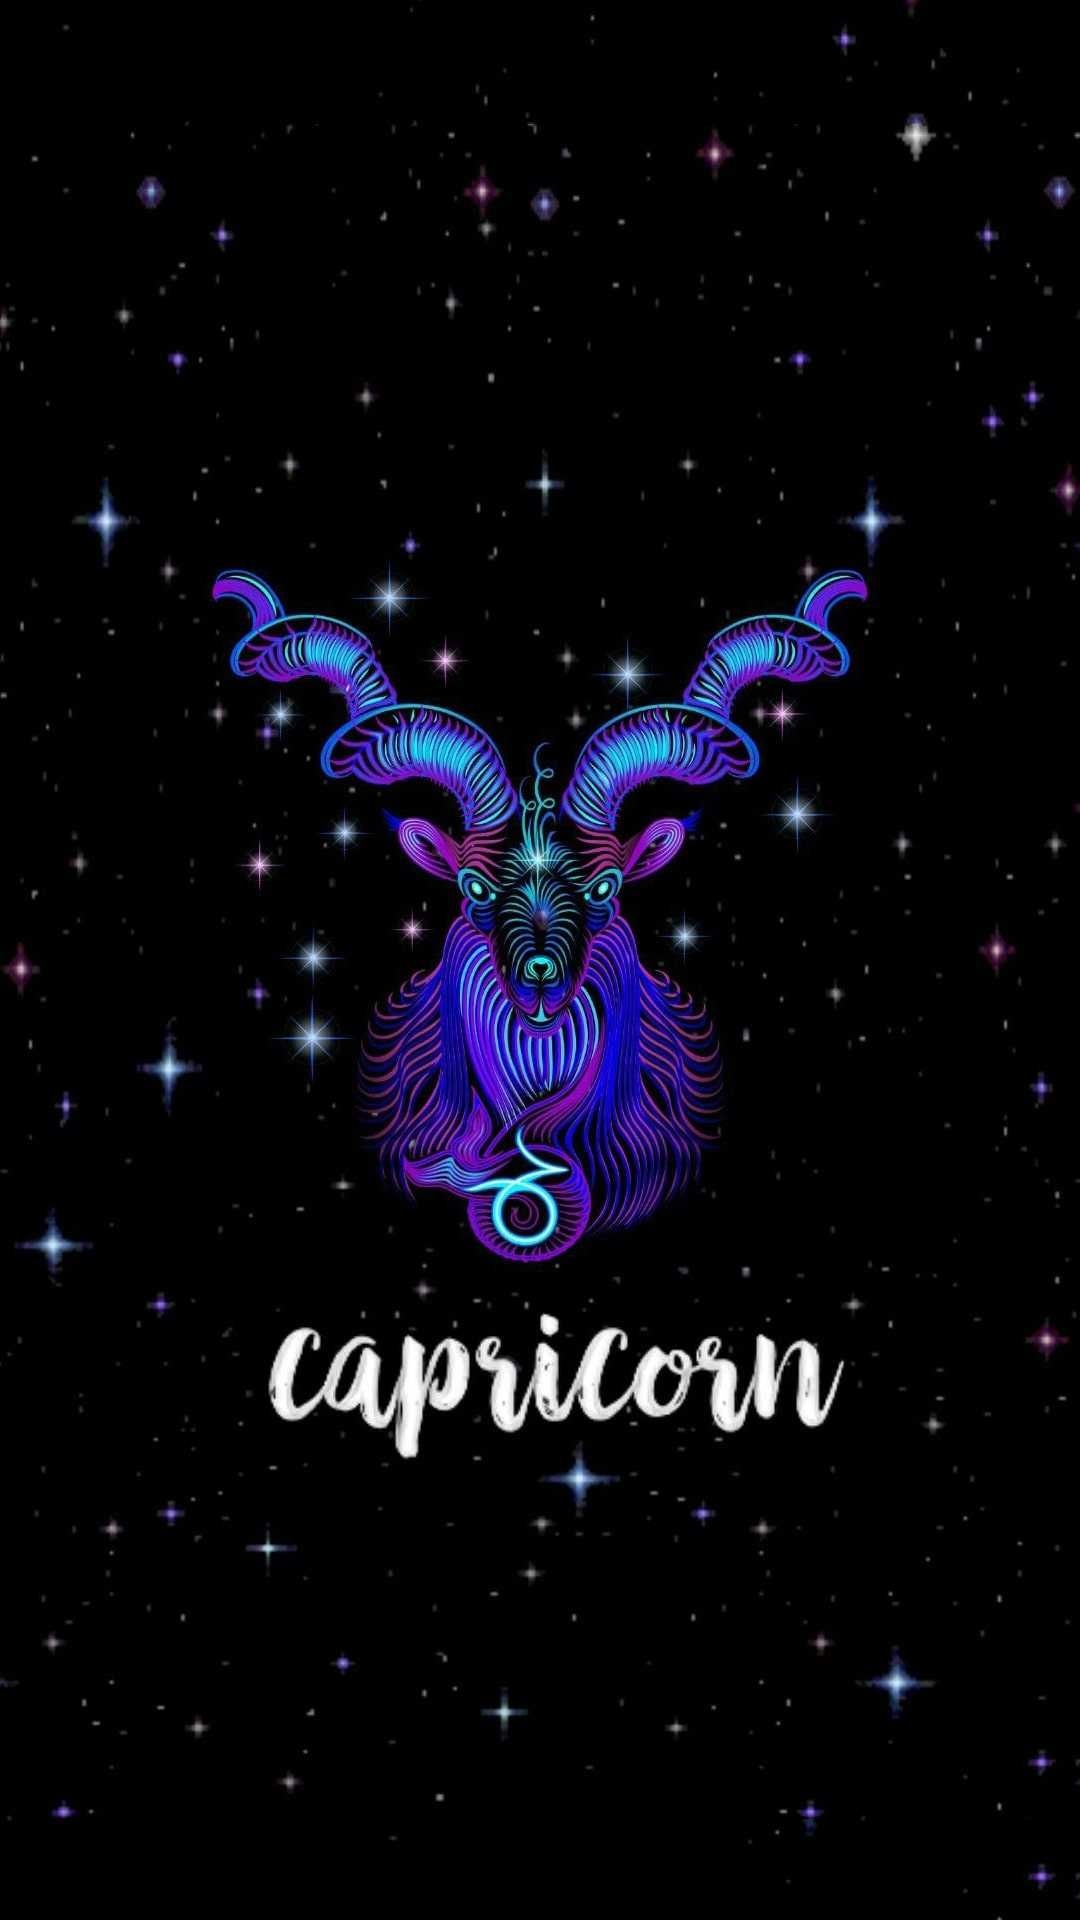 Capricorn wallpapers, Astrological sign artwork, Astrology fascination, 1080x1920 Full HD Phone